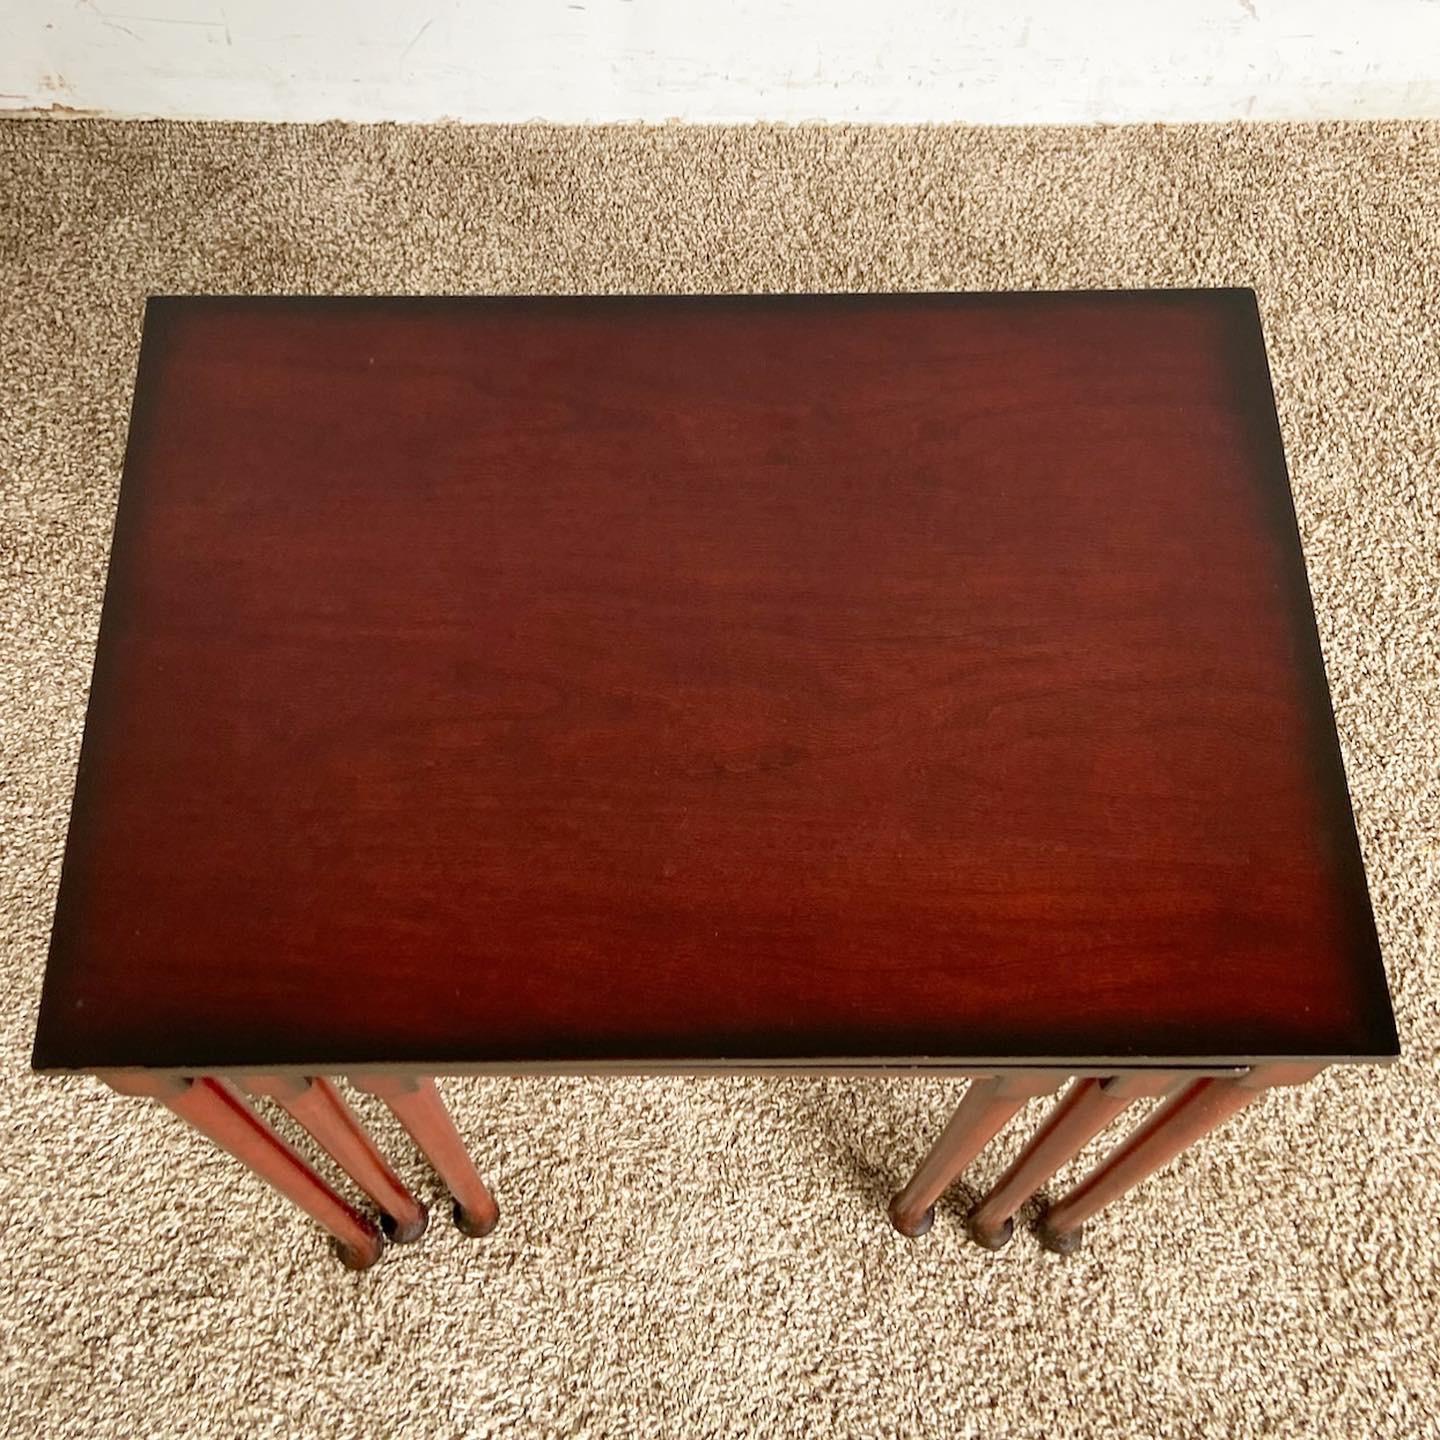 Traditional Mahogany Nesting Tables From Bombay Company - Set of 3 In Good Condition For Sale In Delray Beach, FL